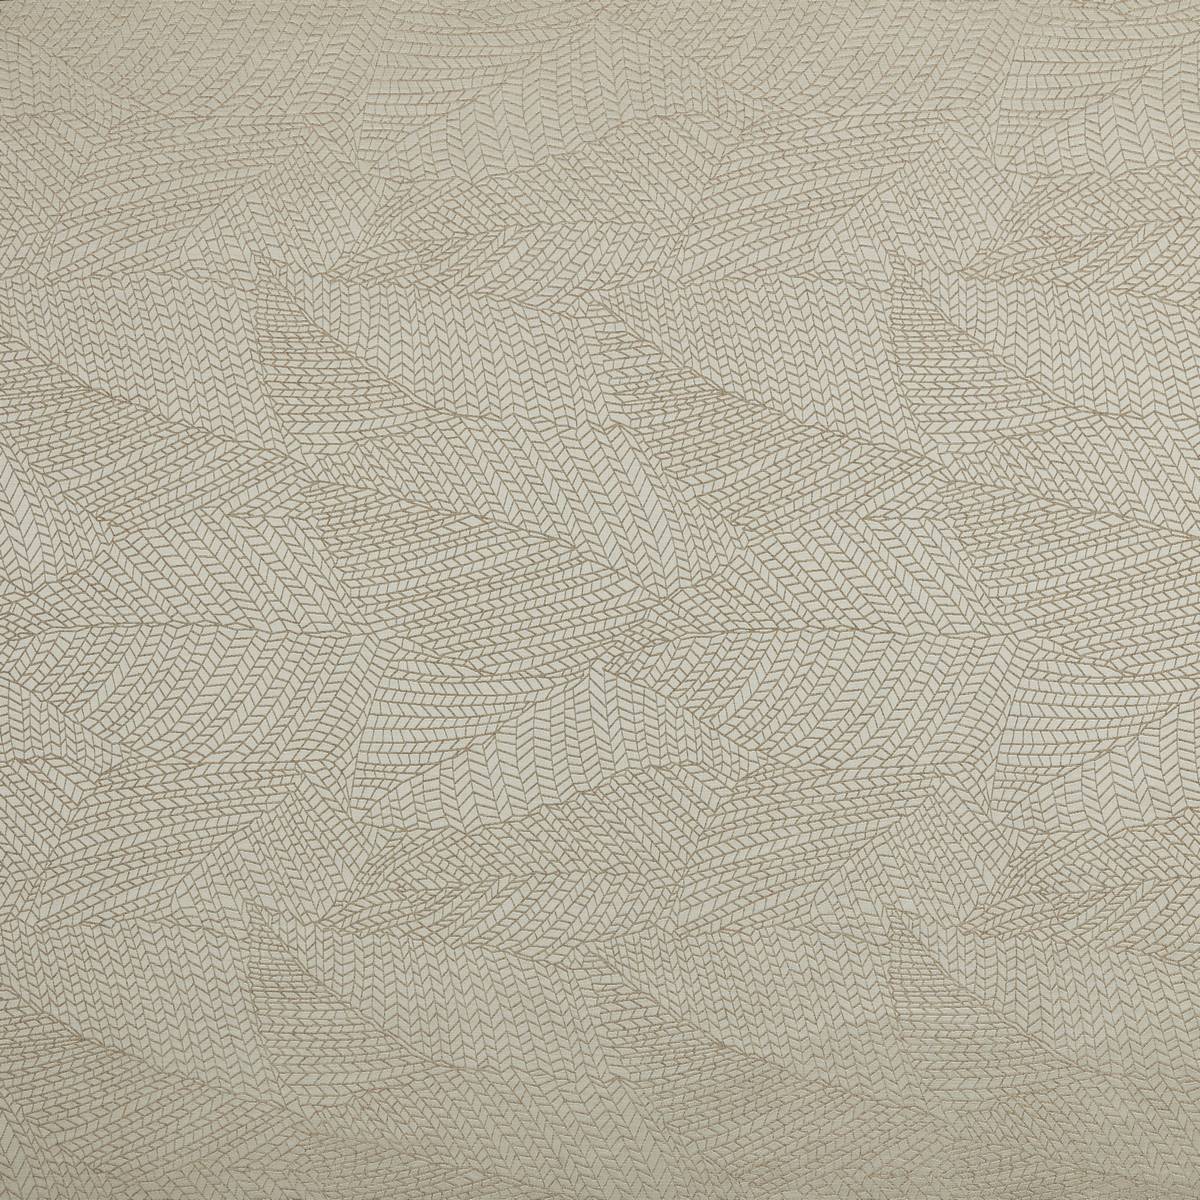 Creed Sand Fabric by Ashley Wilde